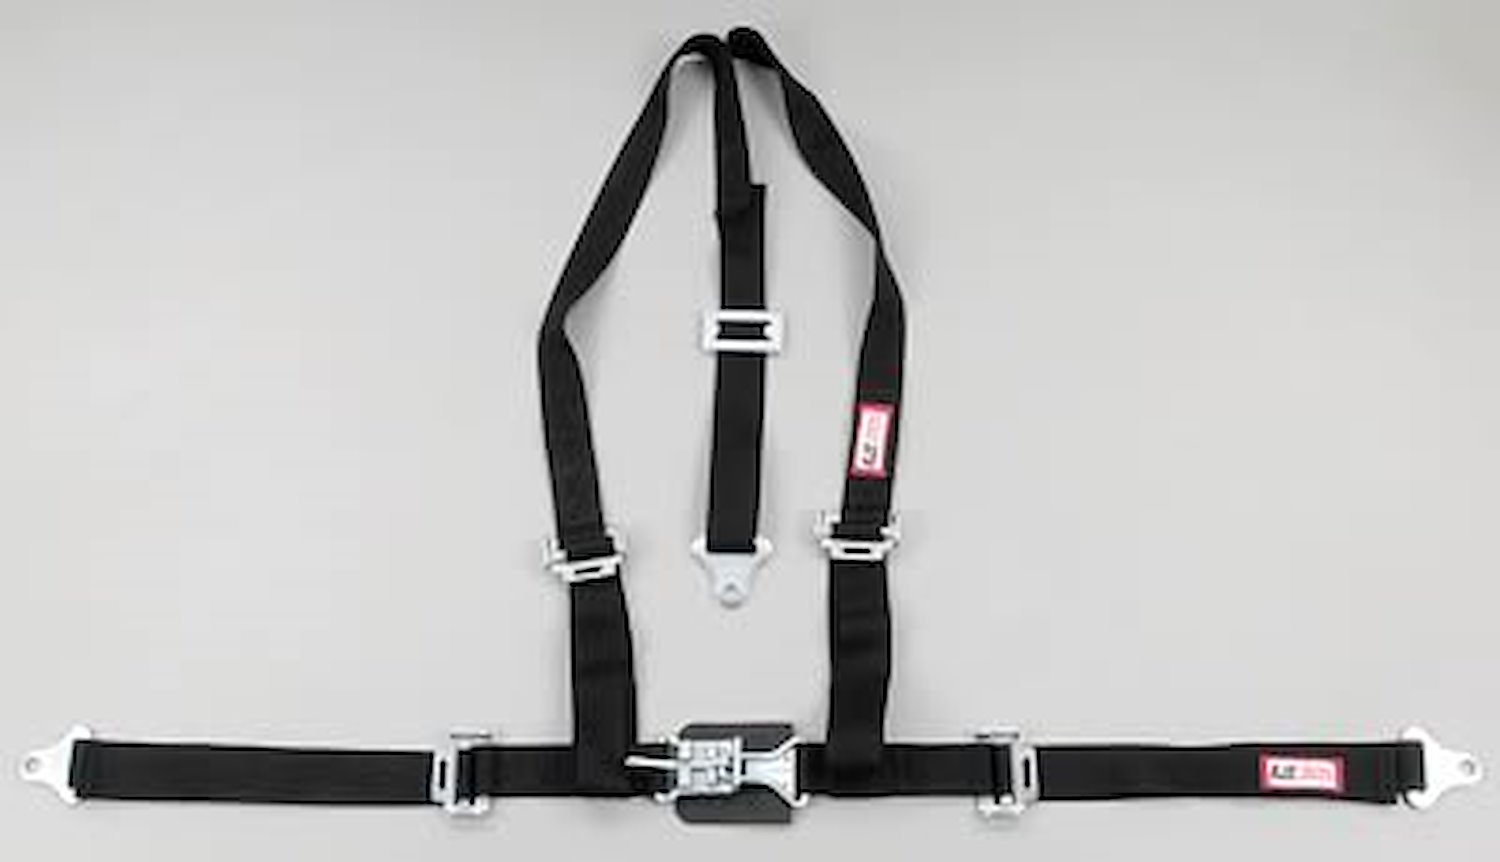 NON-SFI L&L HARNESS 3 PULL UP Lap BELT SNAP SEWN IN 2 S.H. Y FLOOR Mount WRAP/SNAP HOT PINK